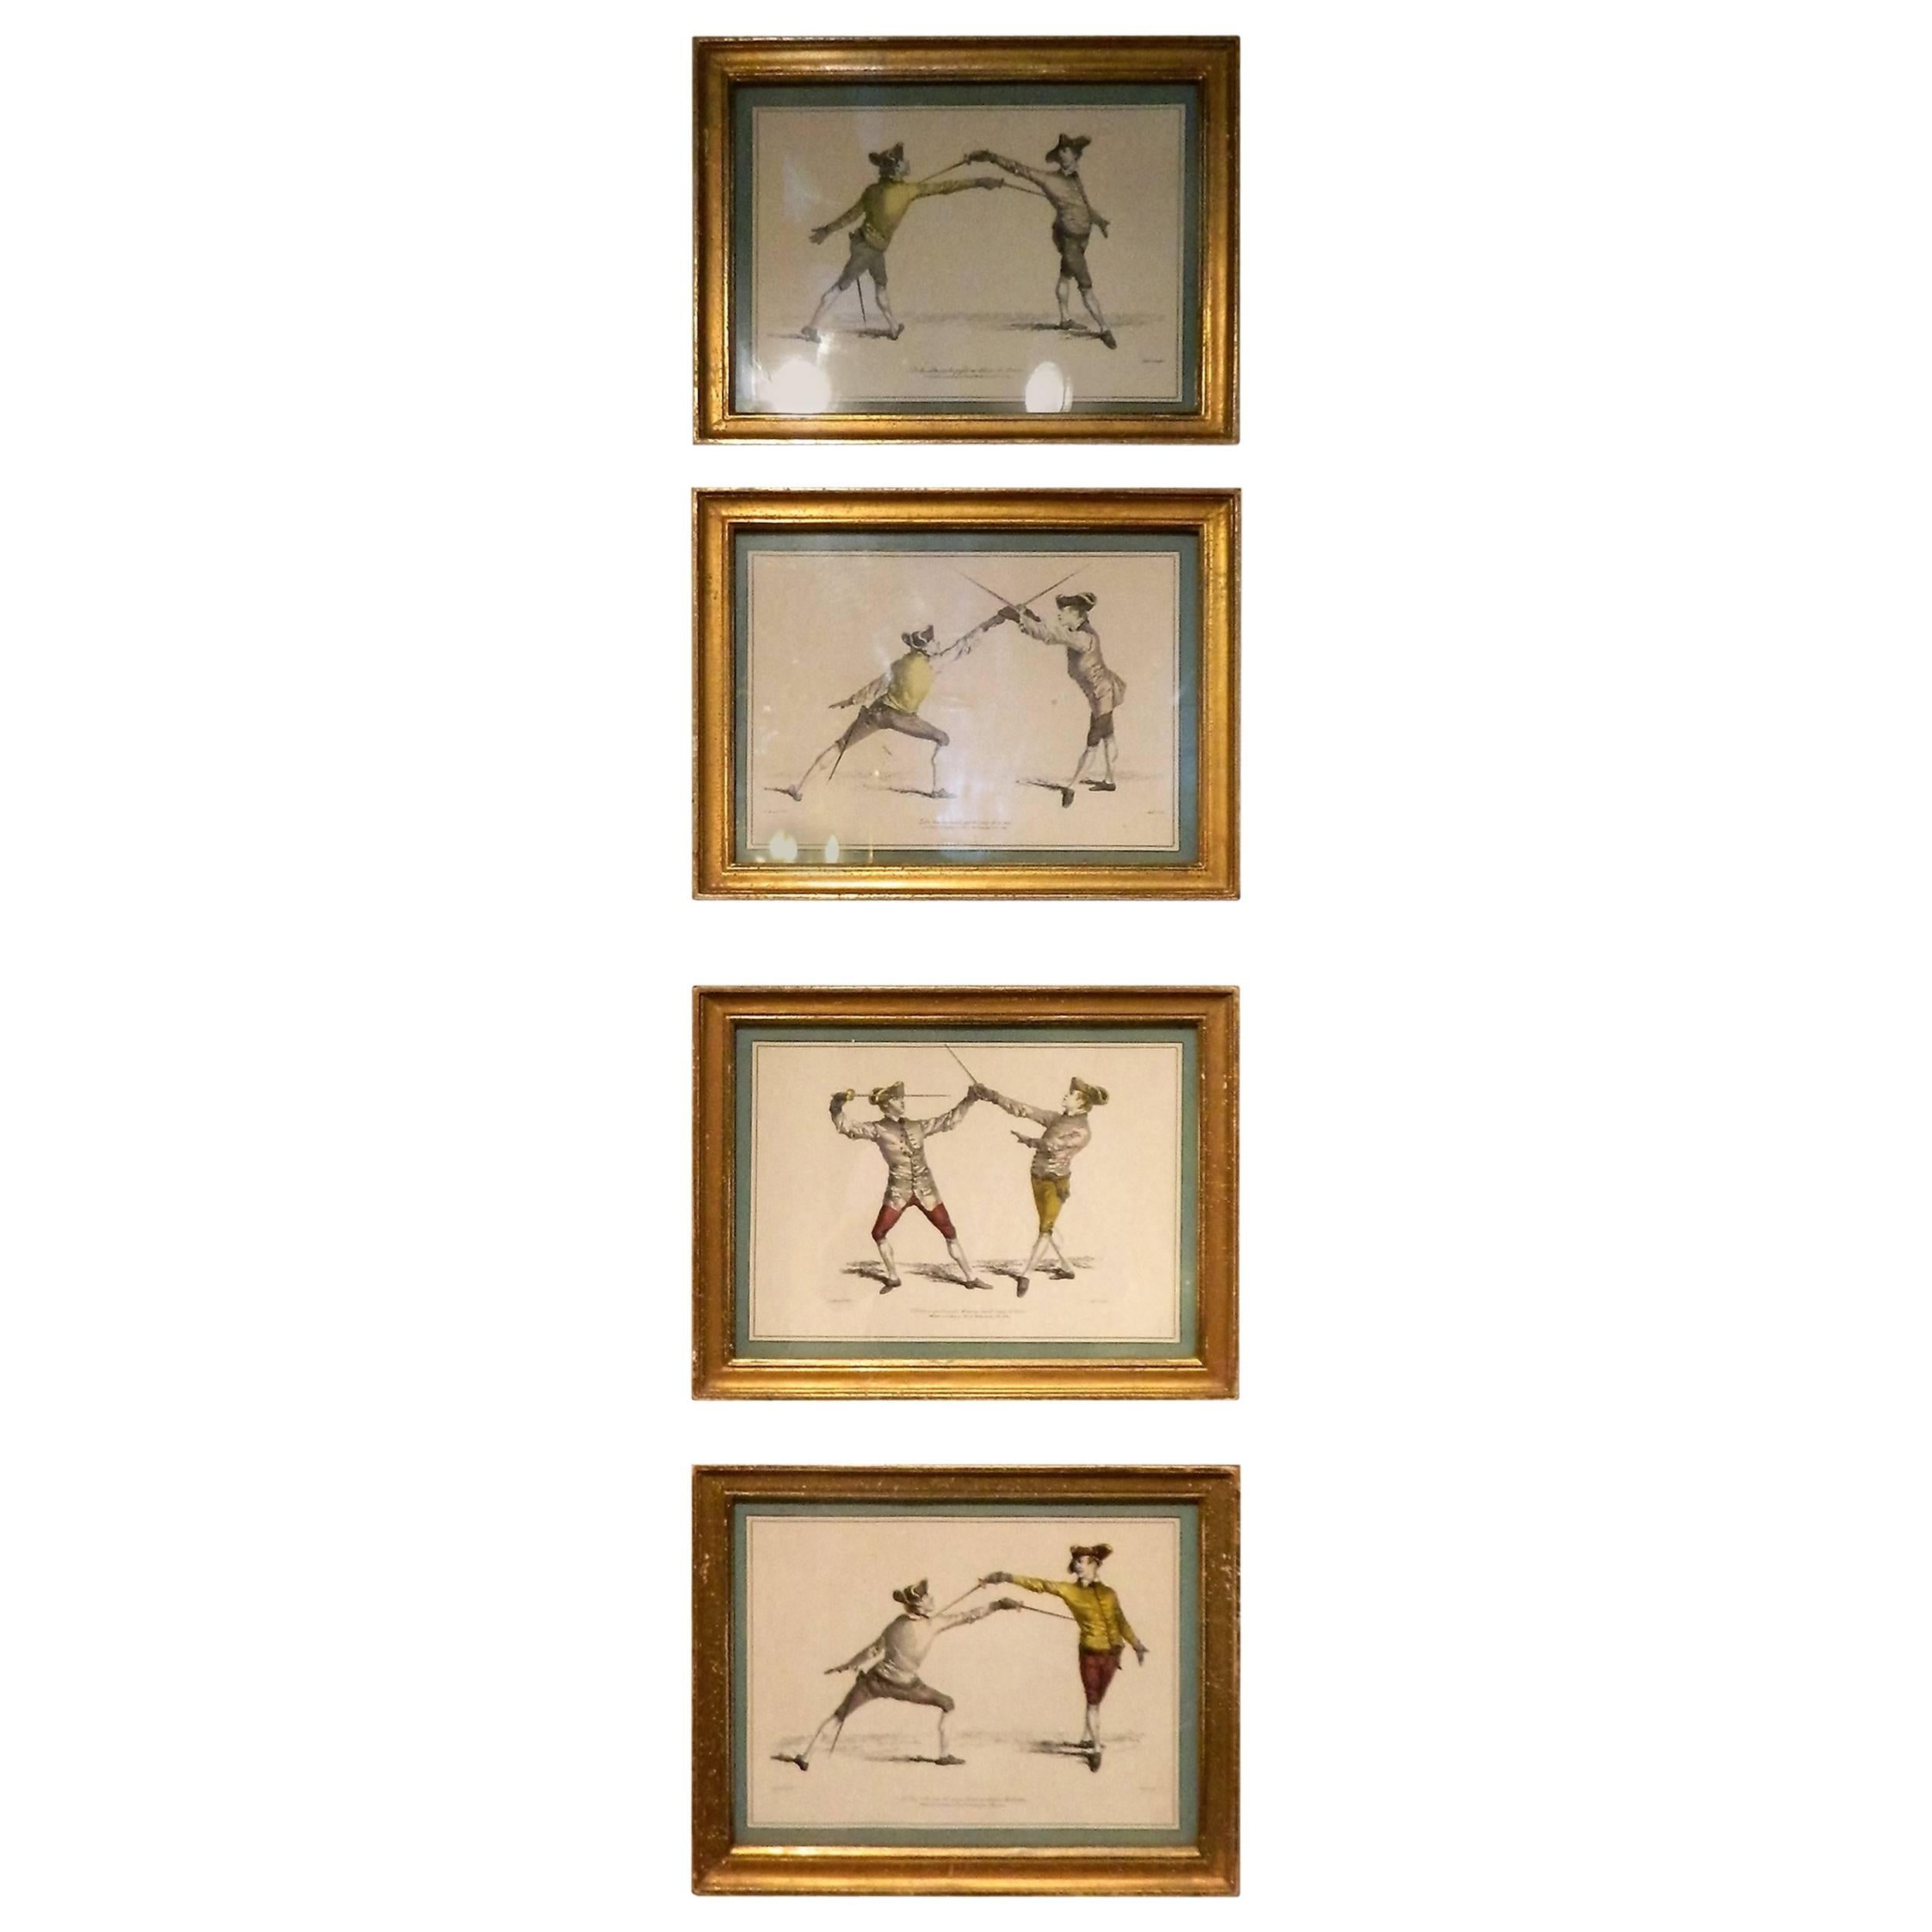 Set of Four Gilded Framed French Prints of Soldiers Fencing, circa 1763